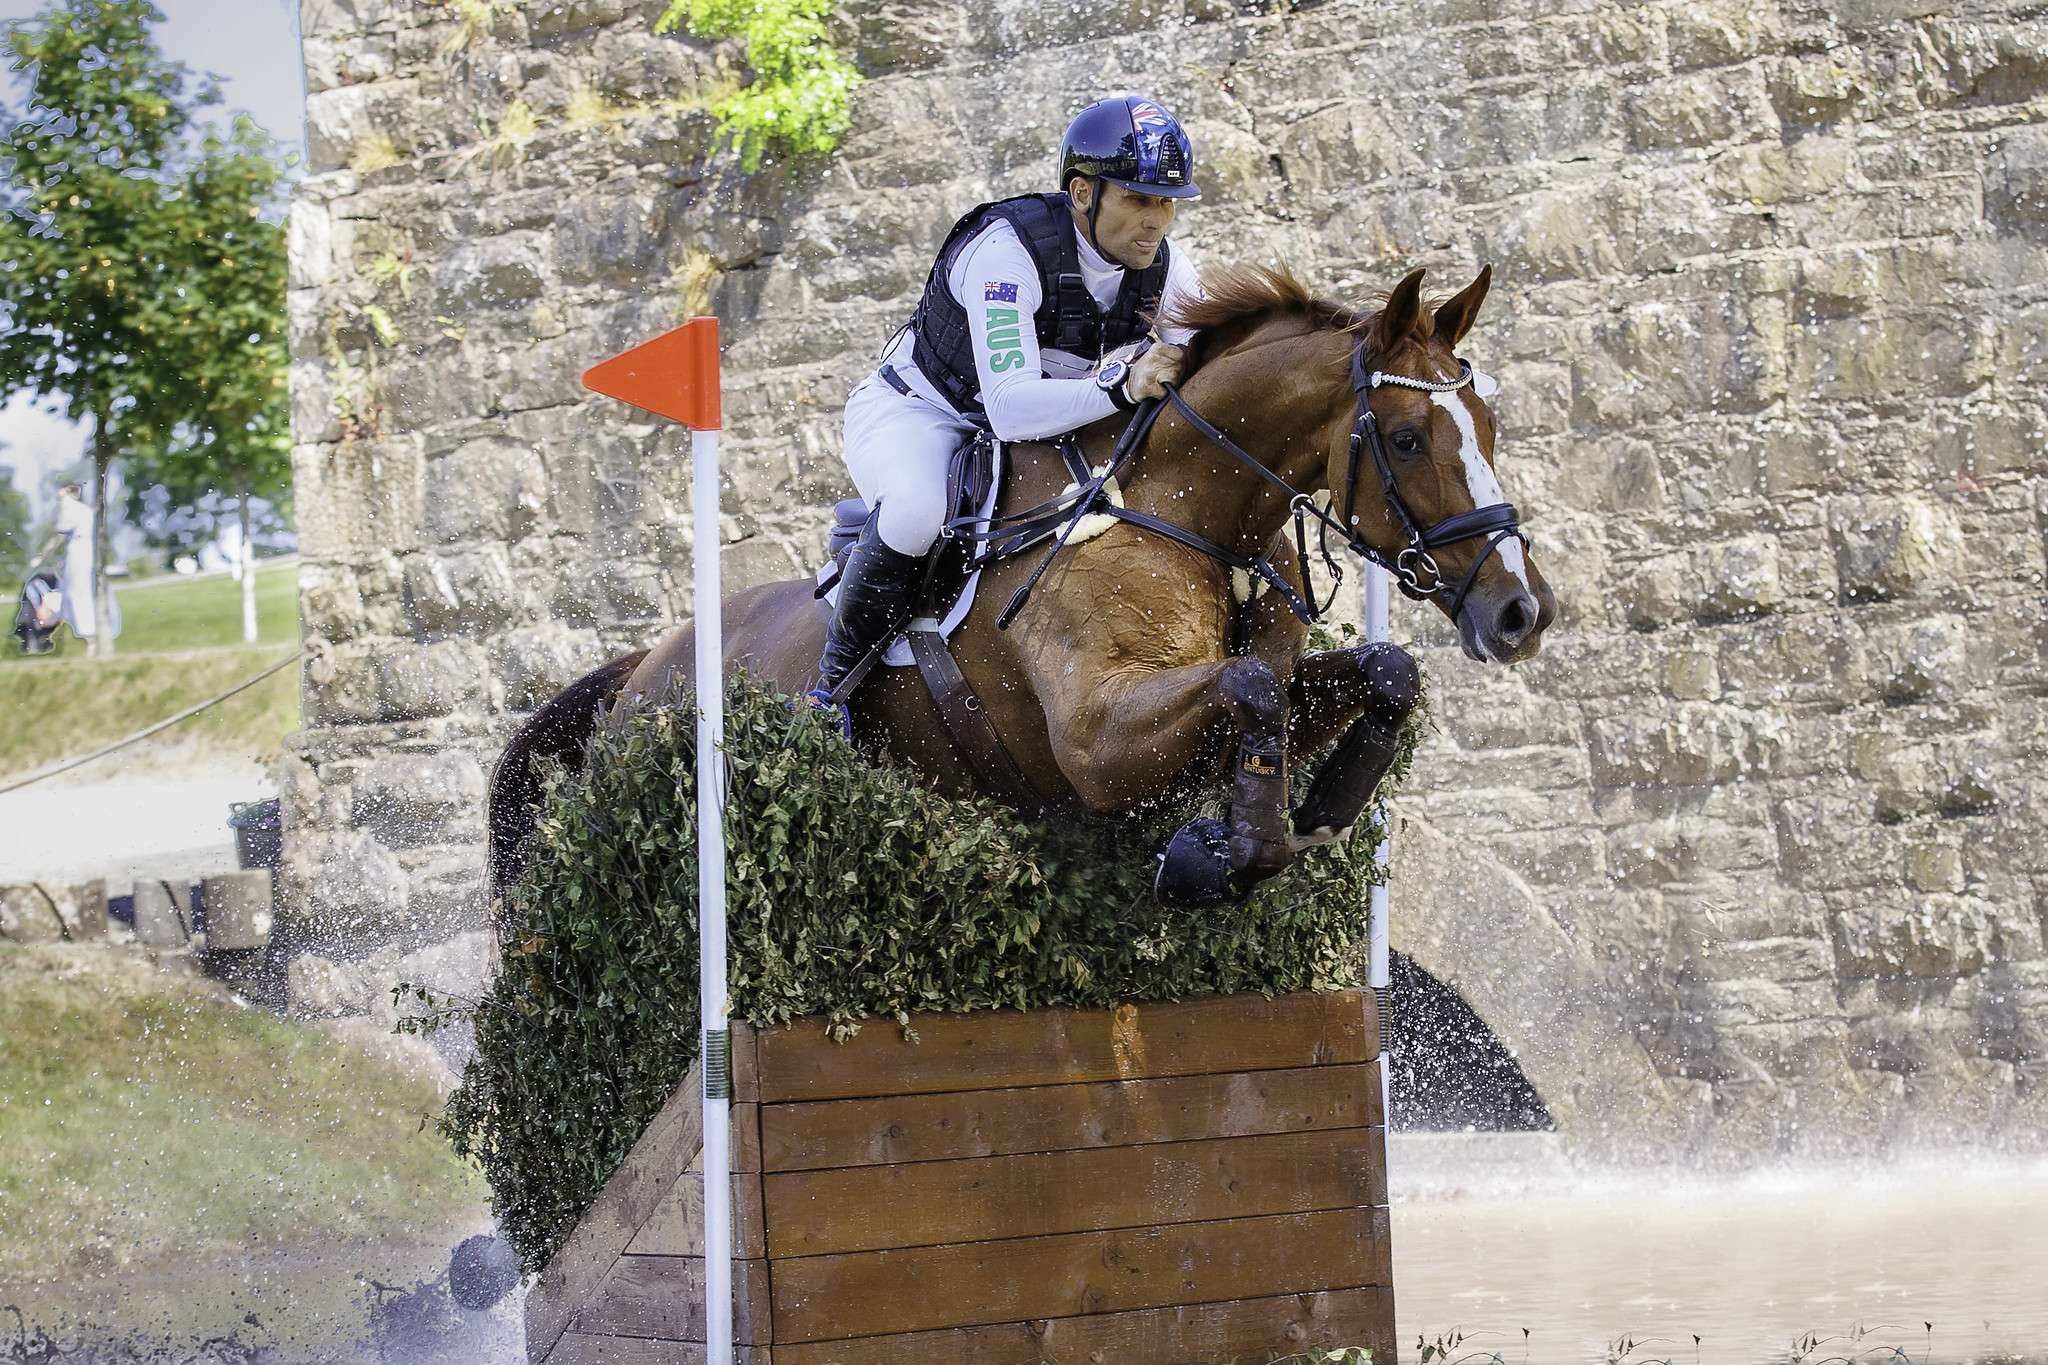 AUS-Shane Rose rides Dotti during the Cross Country for theCCIO3*-L Paris 2024 Olympic Qualifier. 2023 IRL-Millstreet International Horse Trial. Millstreet Town, Co. Cork, Ireland. Saturday 3 June 2023. Copyright Photo: Libby Law Photography